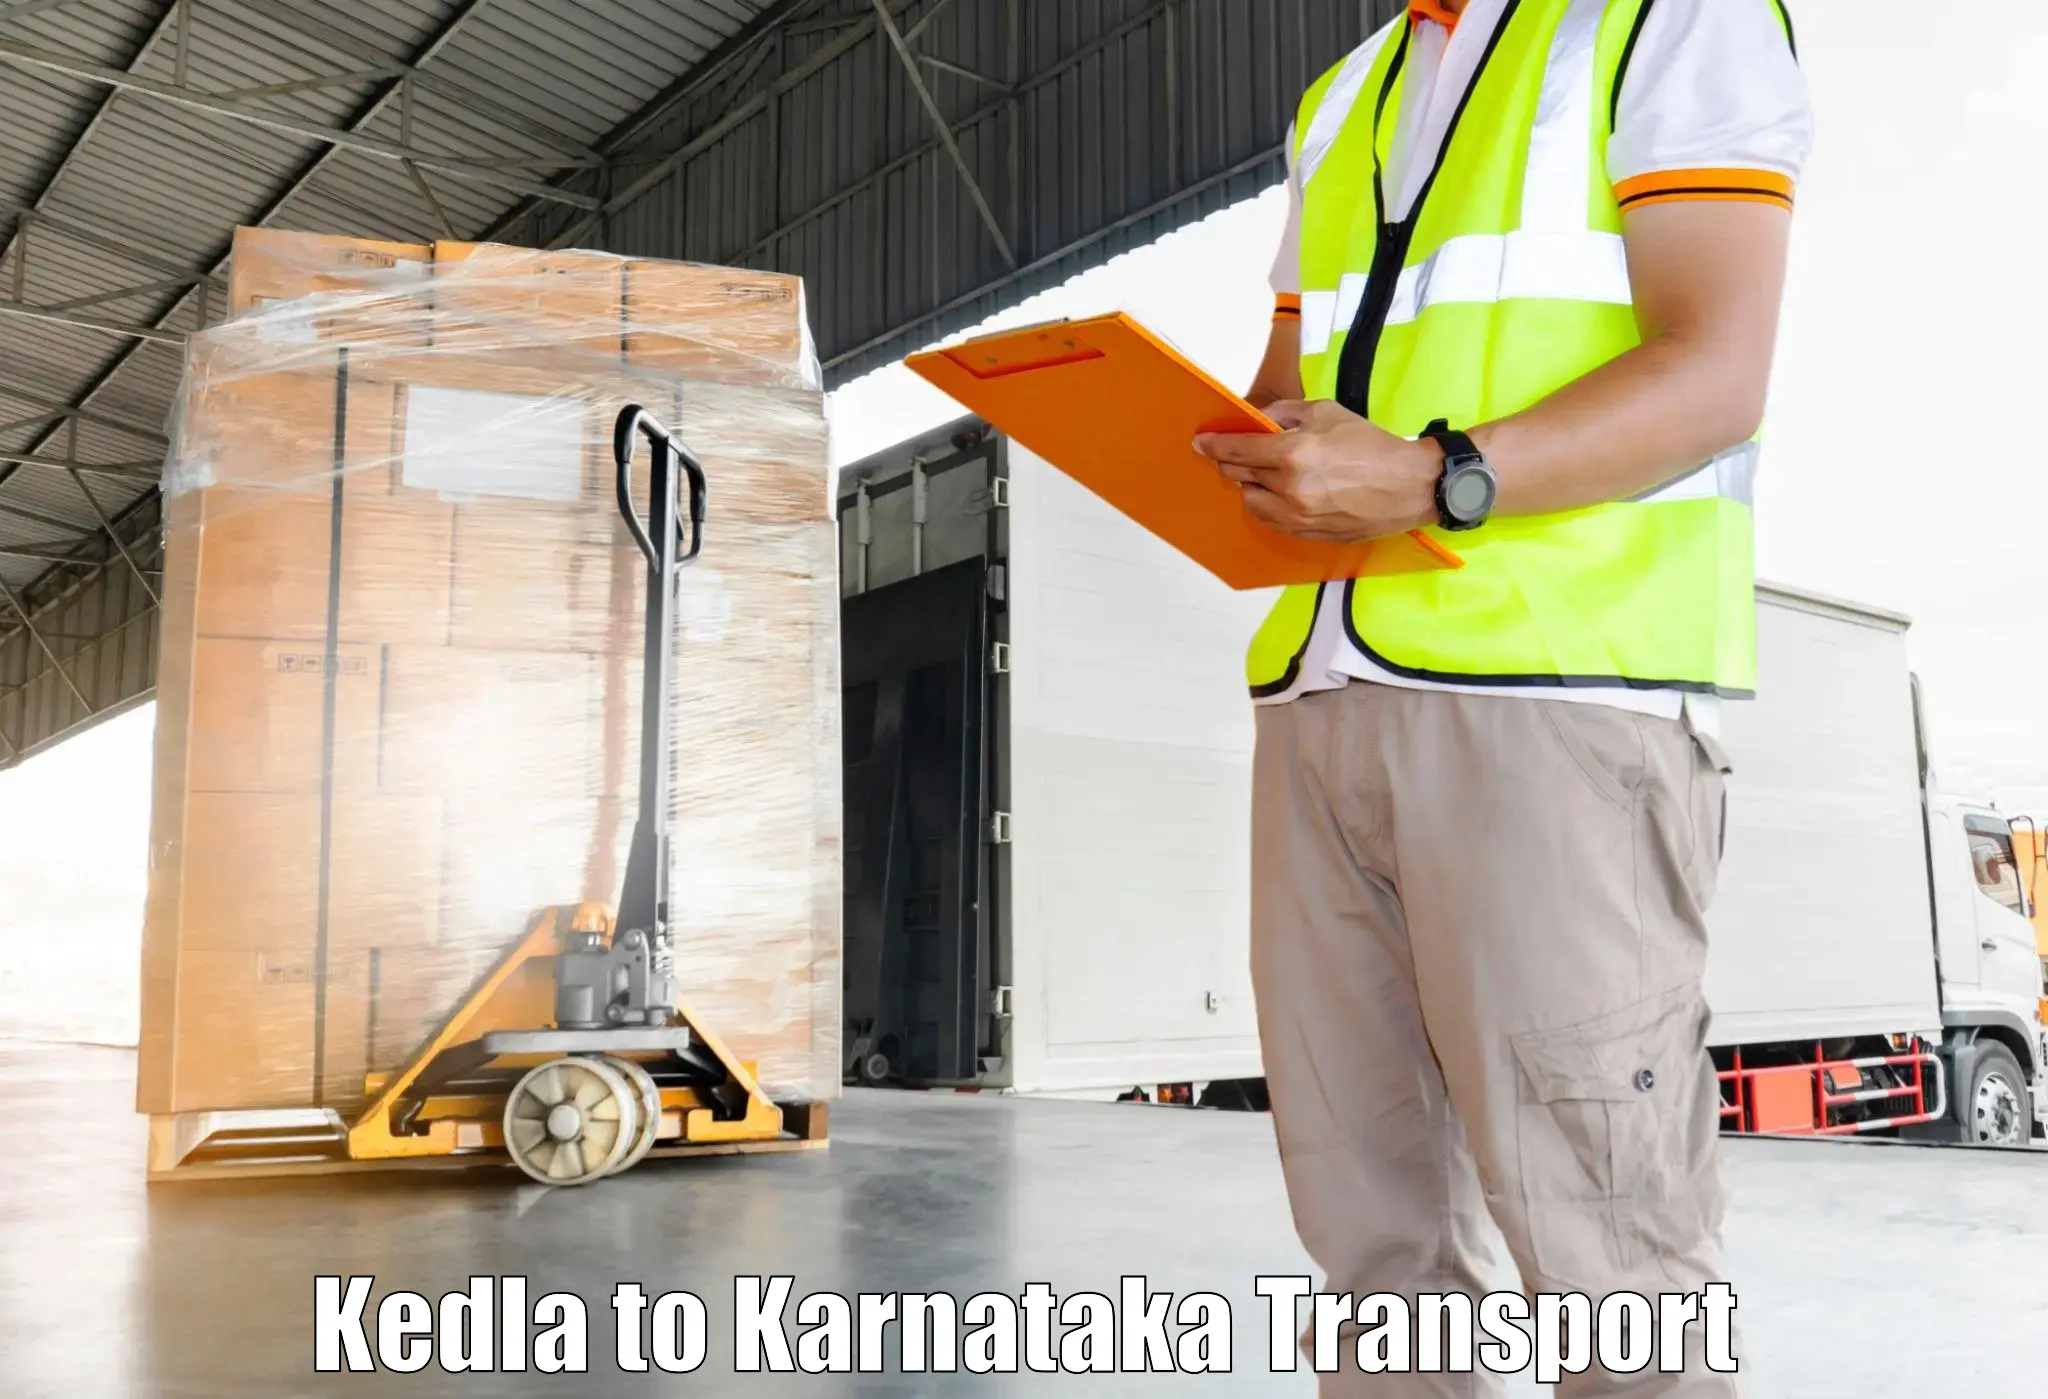 Interstate transport services Kedla to Manipal Academy of Higher Education